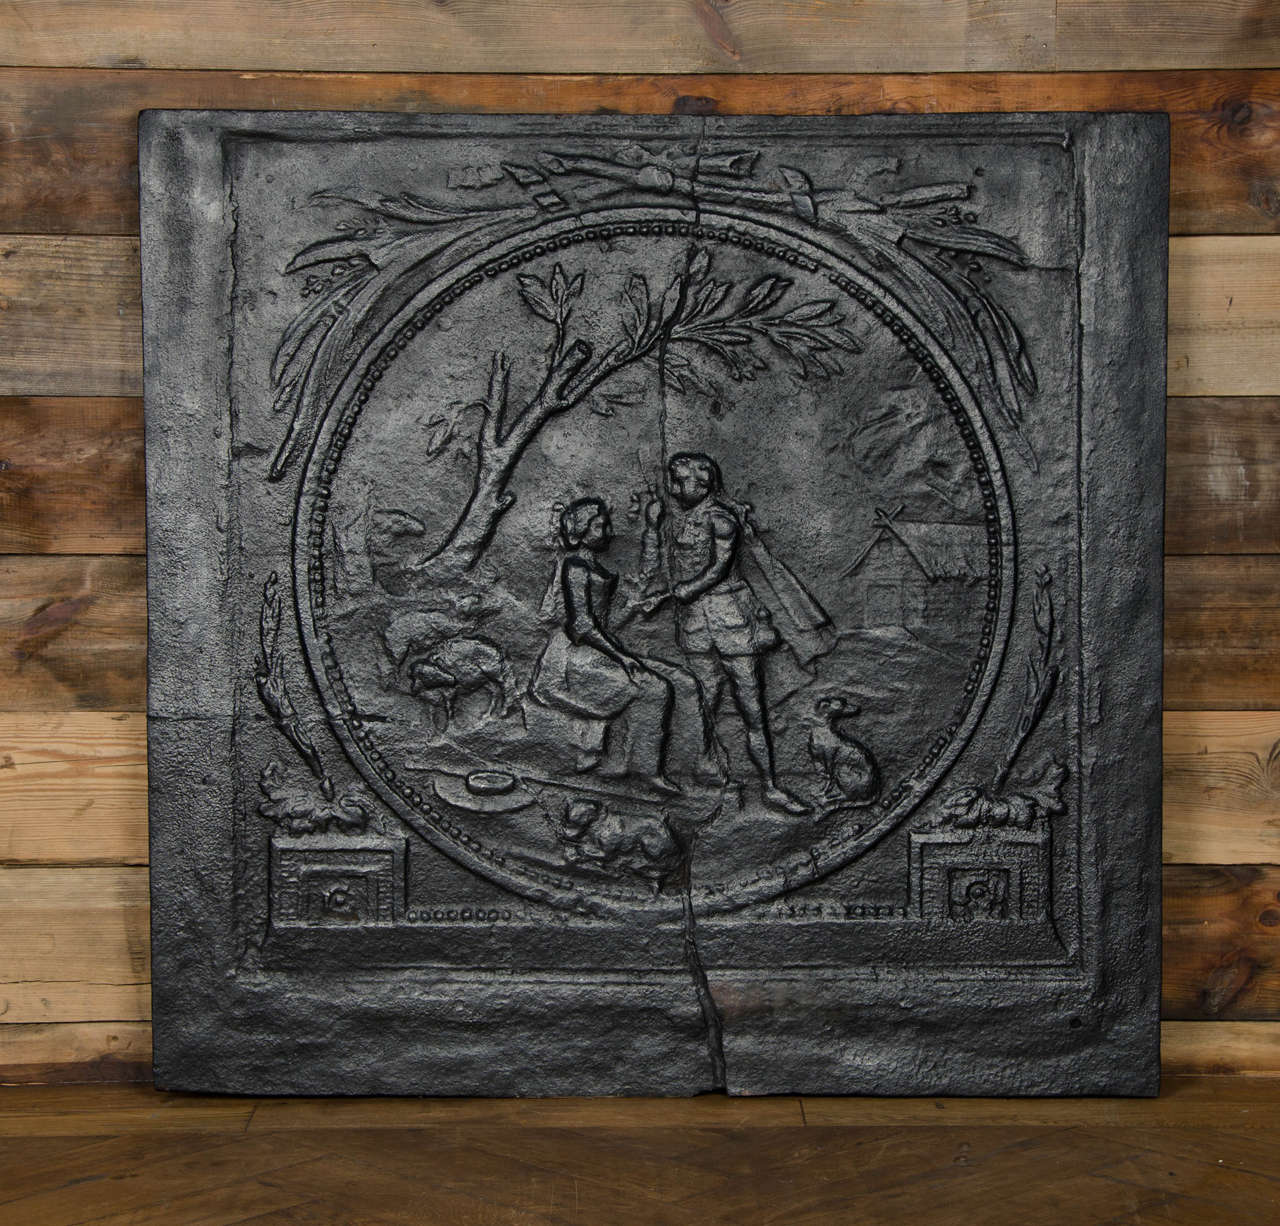 A wonderful original antique fireback dating from the early eighteenth century. This superb Georgian fireback depicts a romantic pastoral scene of a pair of lovers sat under a tree, surrounded by hunting dogs. The fireback has a crack in the centre